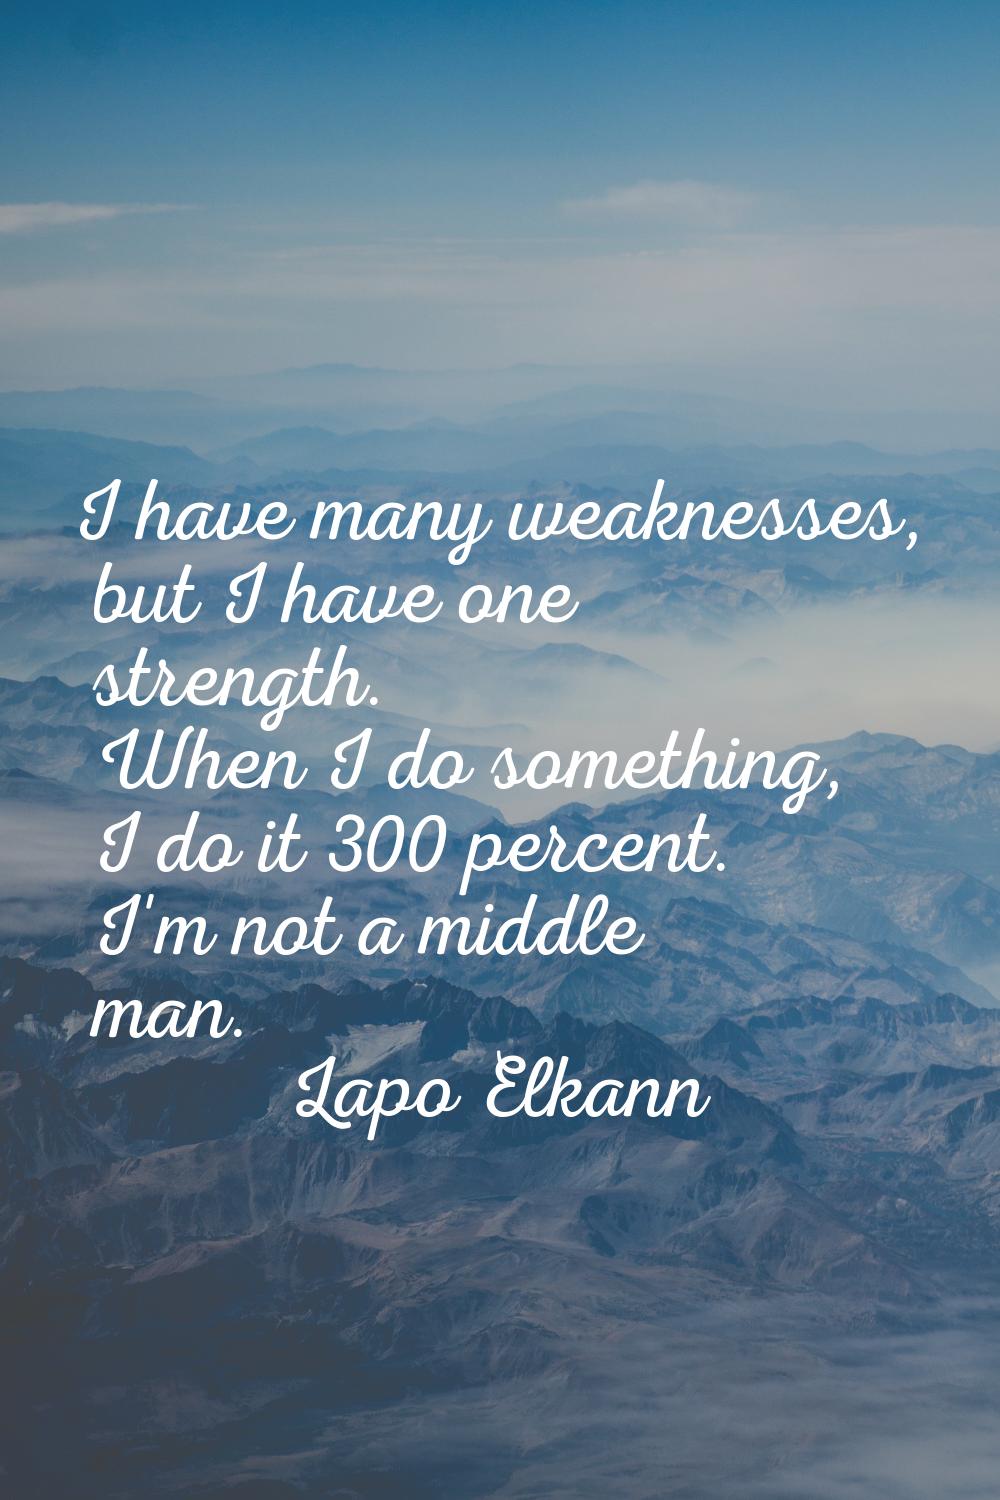 I have many weaknesses, but I have one strength. When I do something, I do it 300 percent. I'm not 